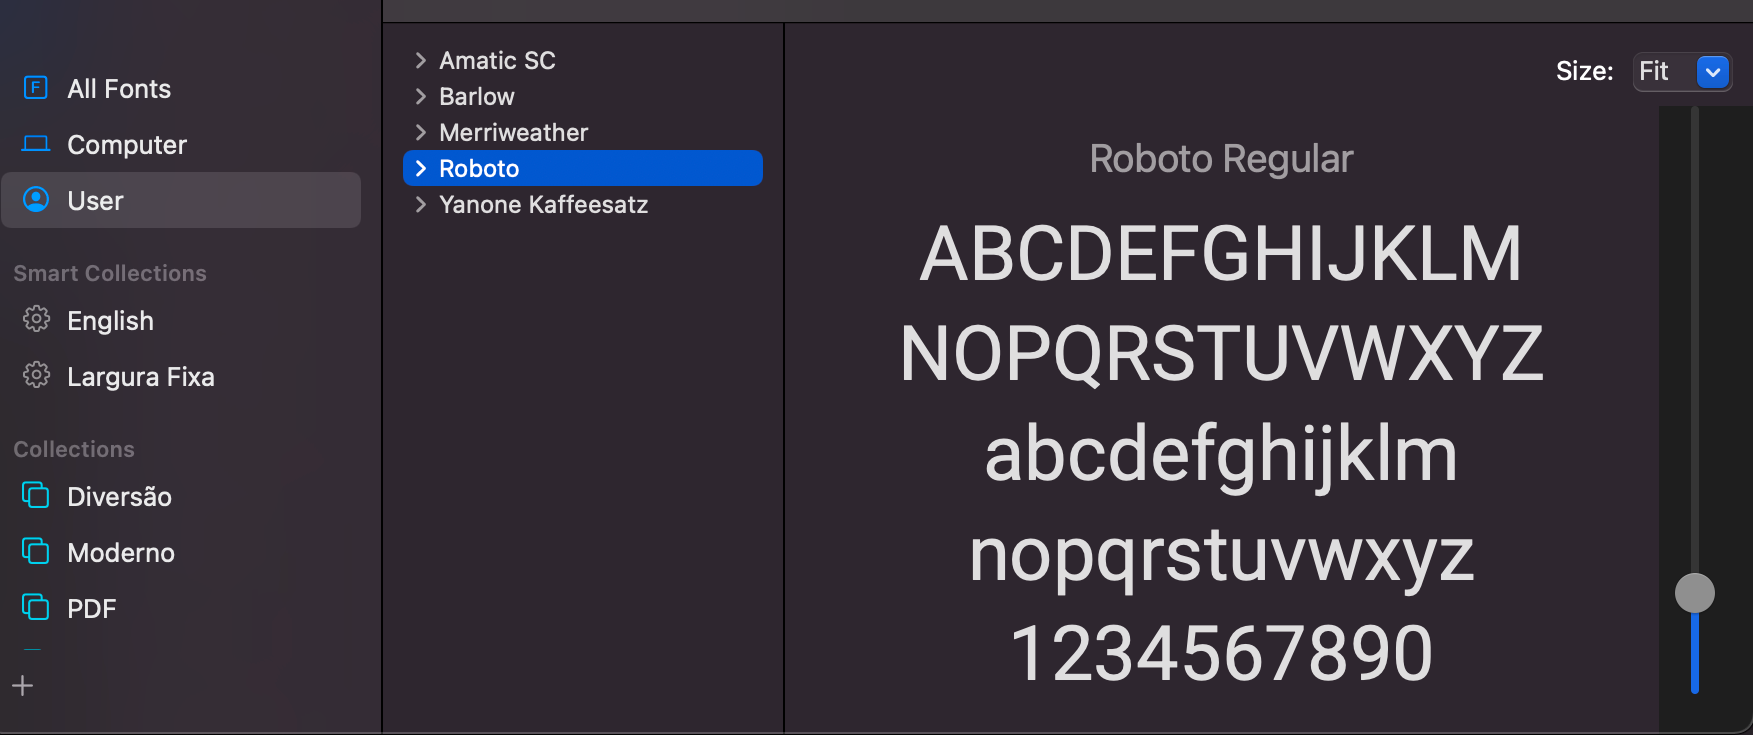 Roboto font installed on the system